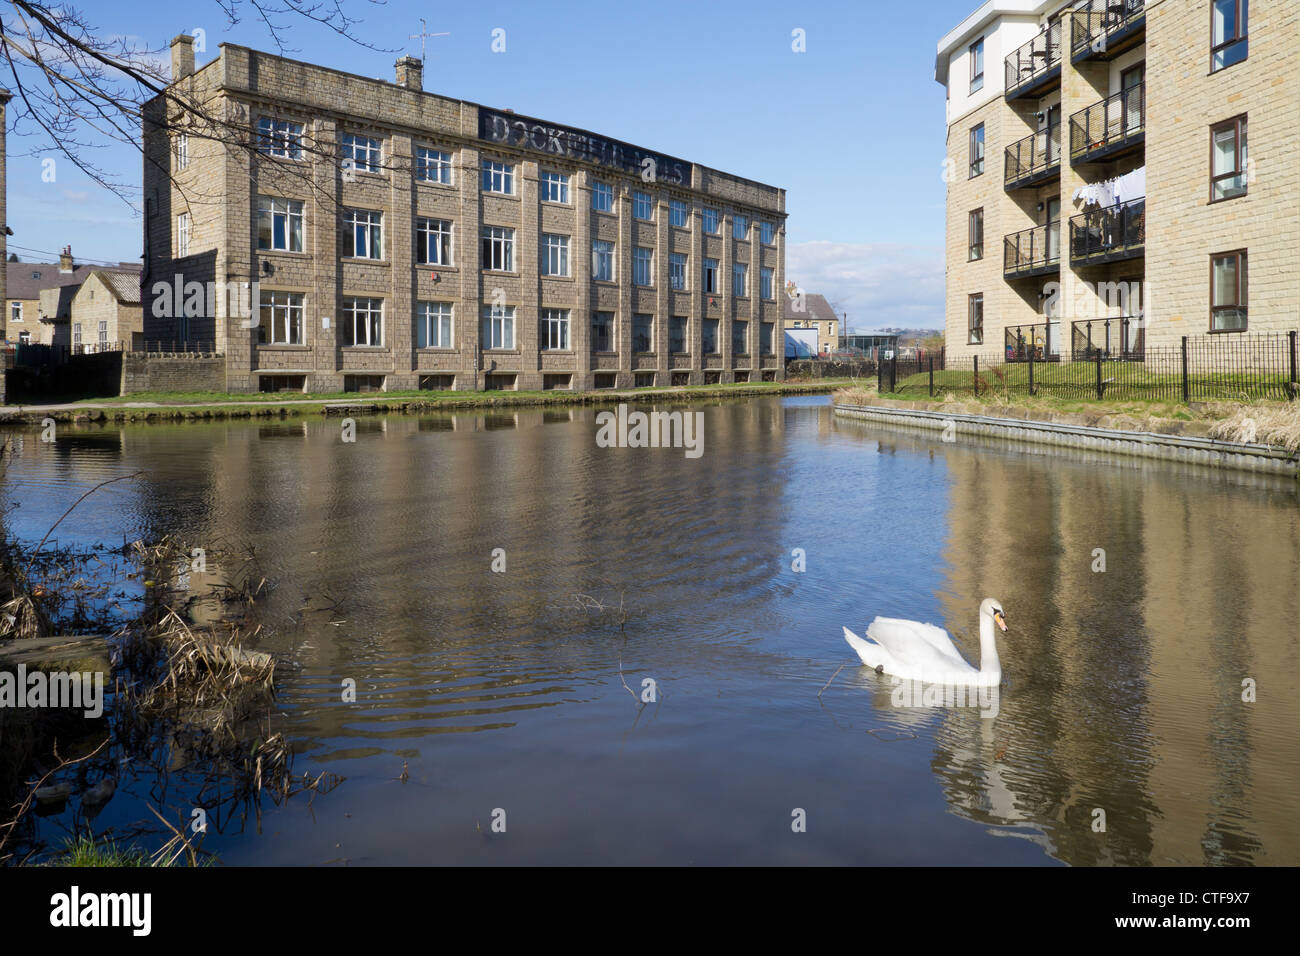 Dockfield Mills, by the Leeds Liverpool Canal at Shipley. Stock Photo